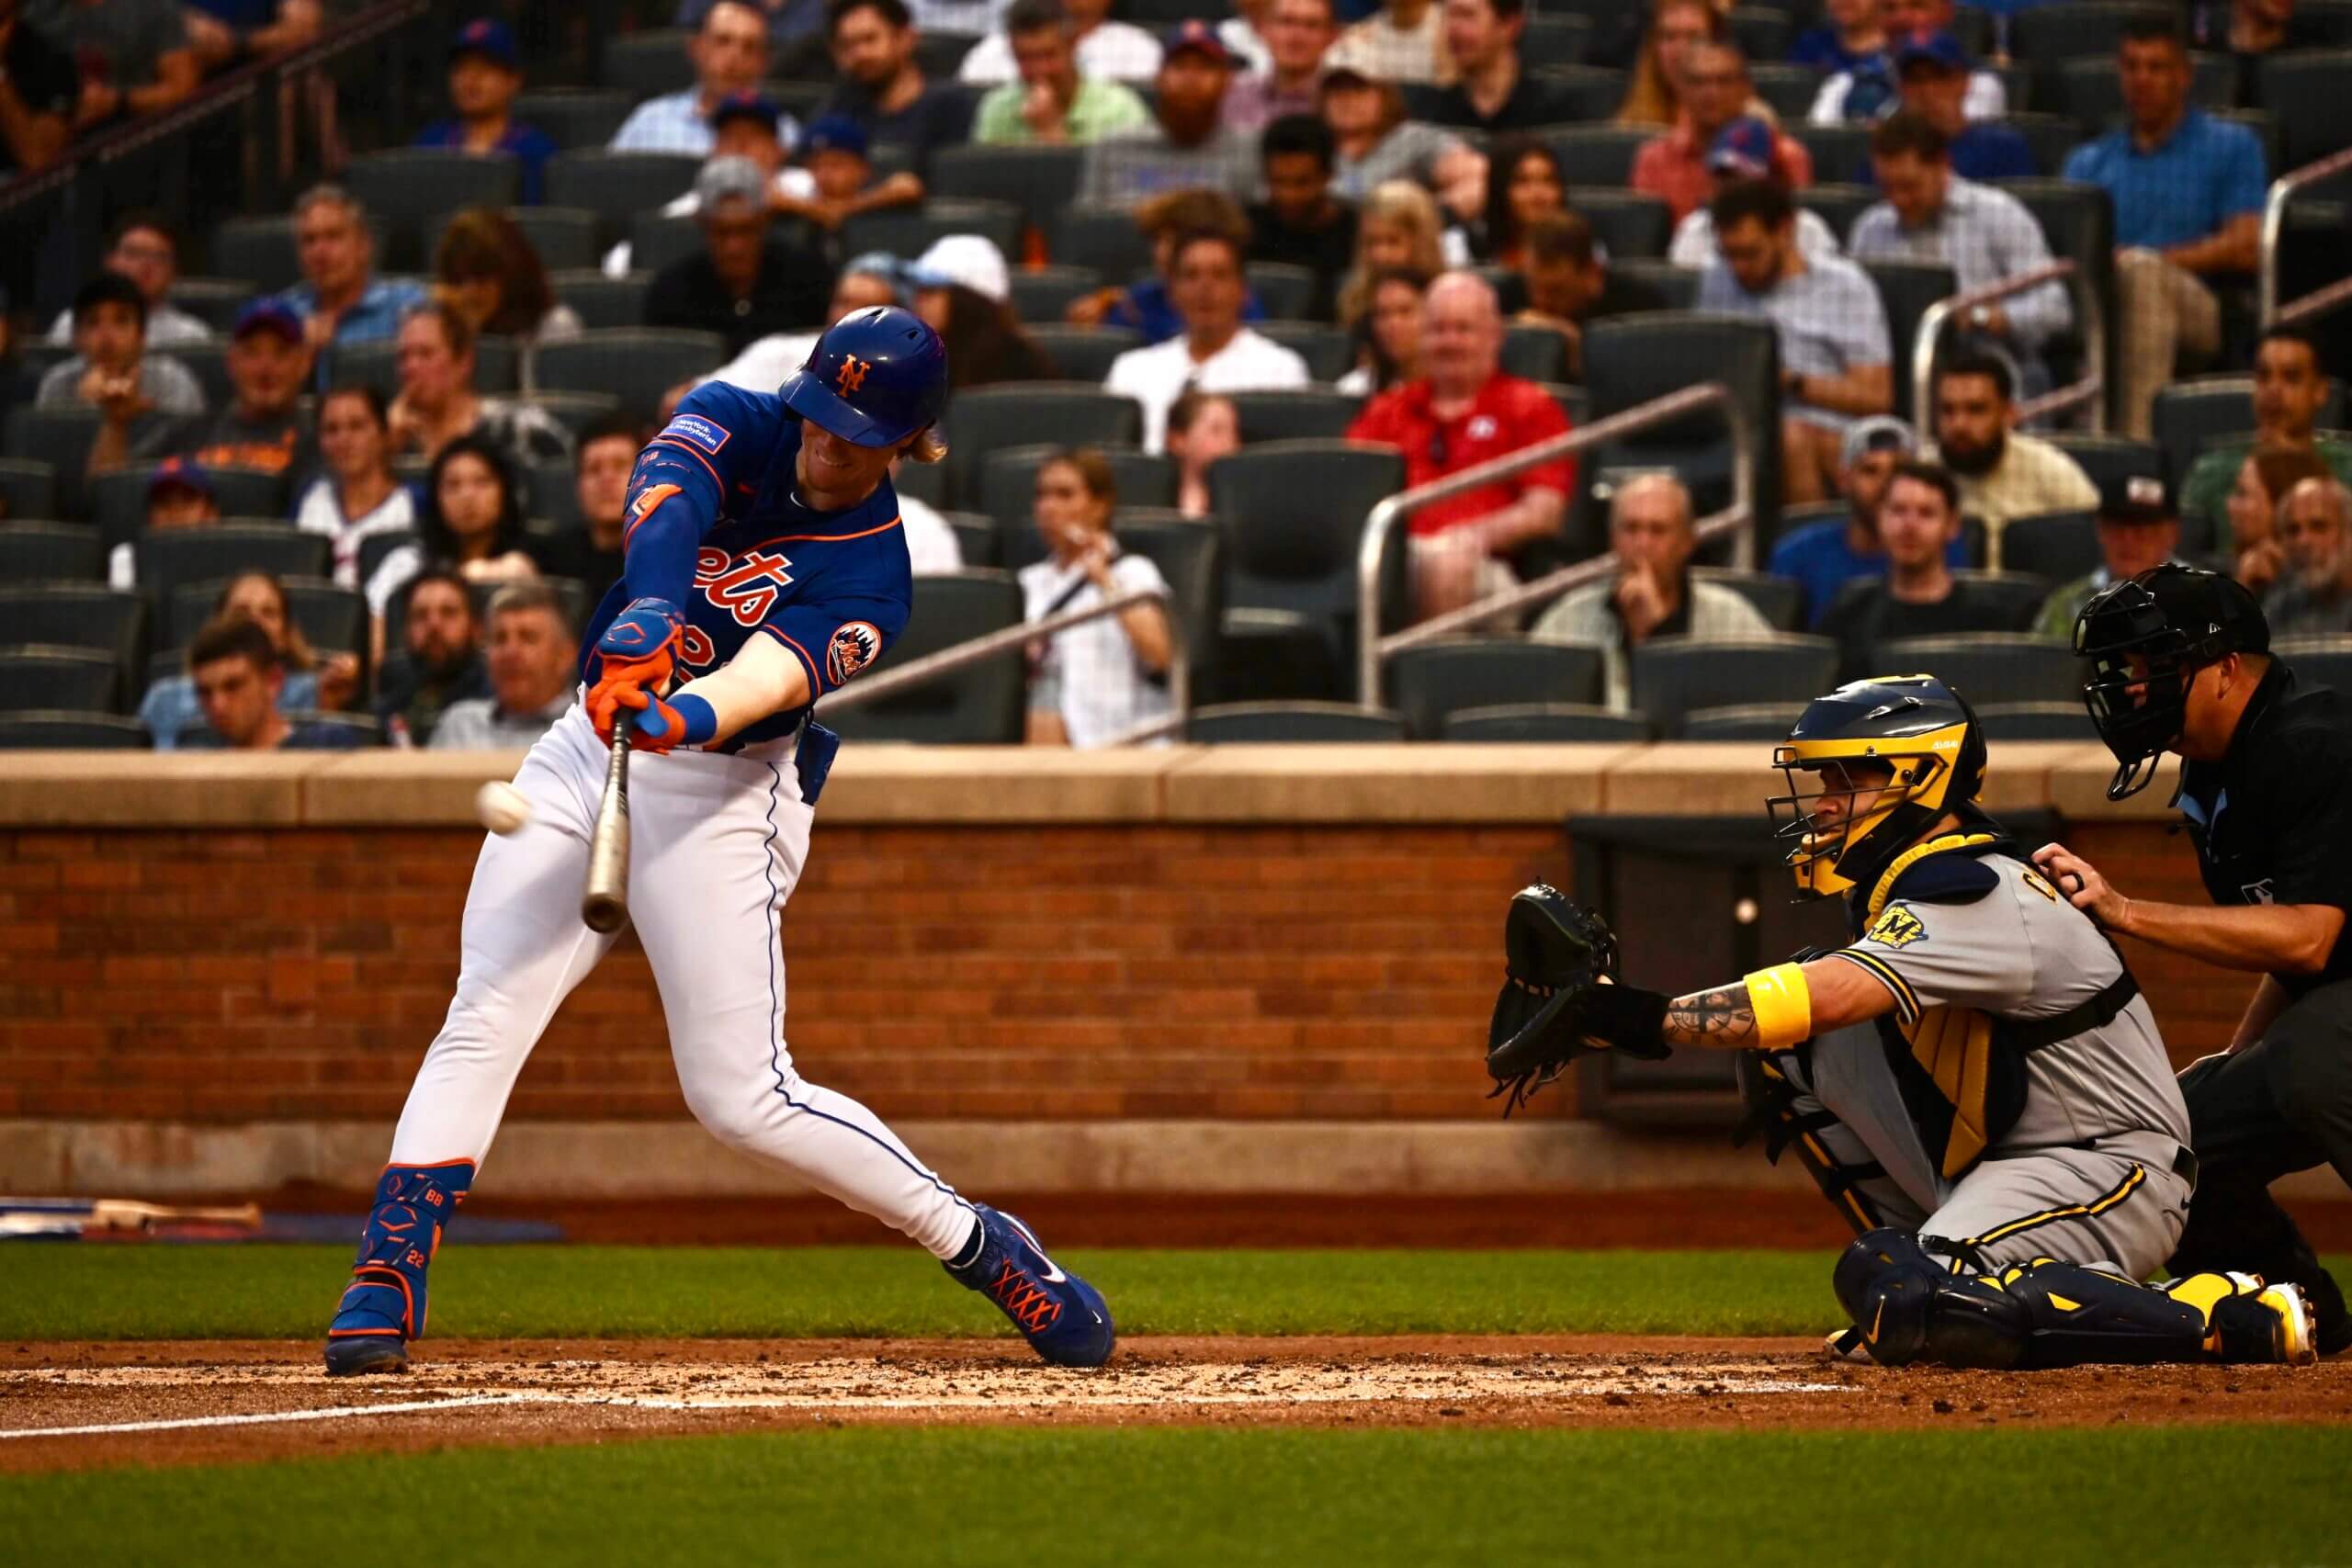 Mets notes: Brett Baty's demotion and Starling Marte's trip back